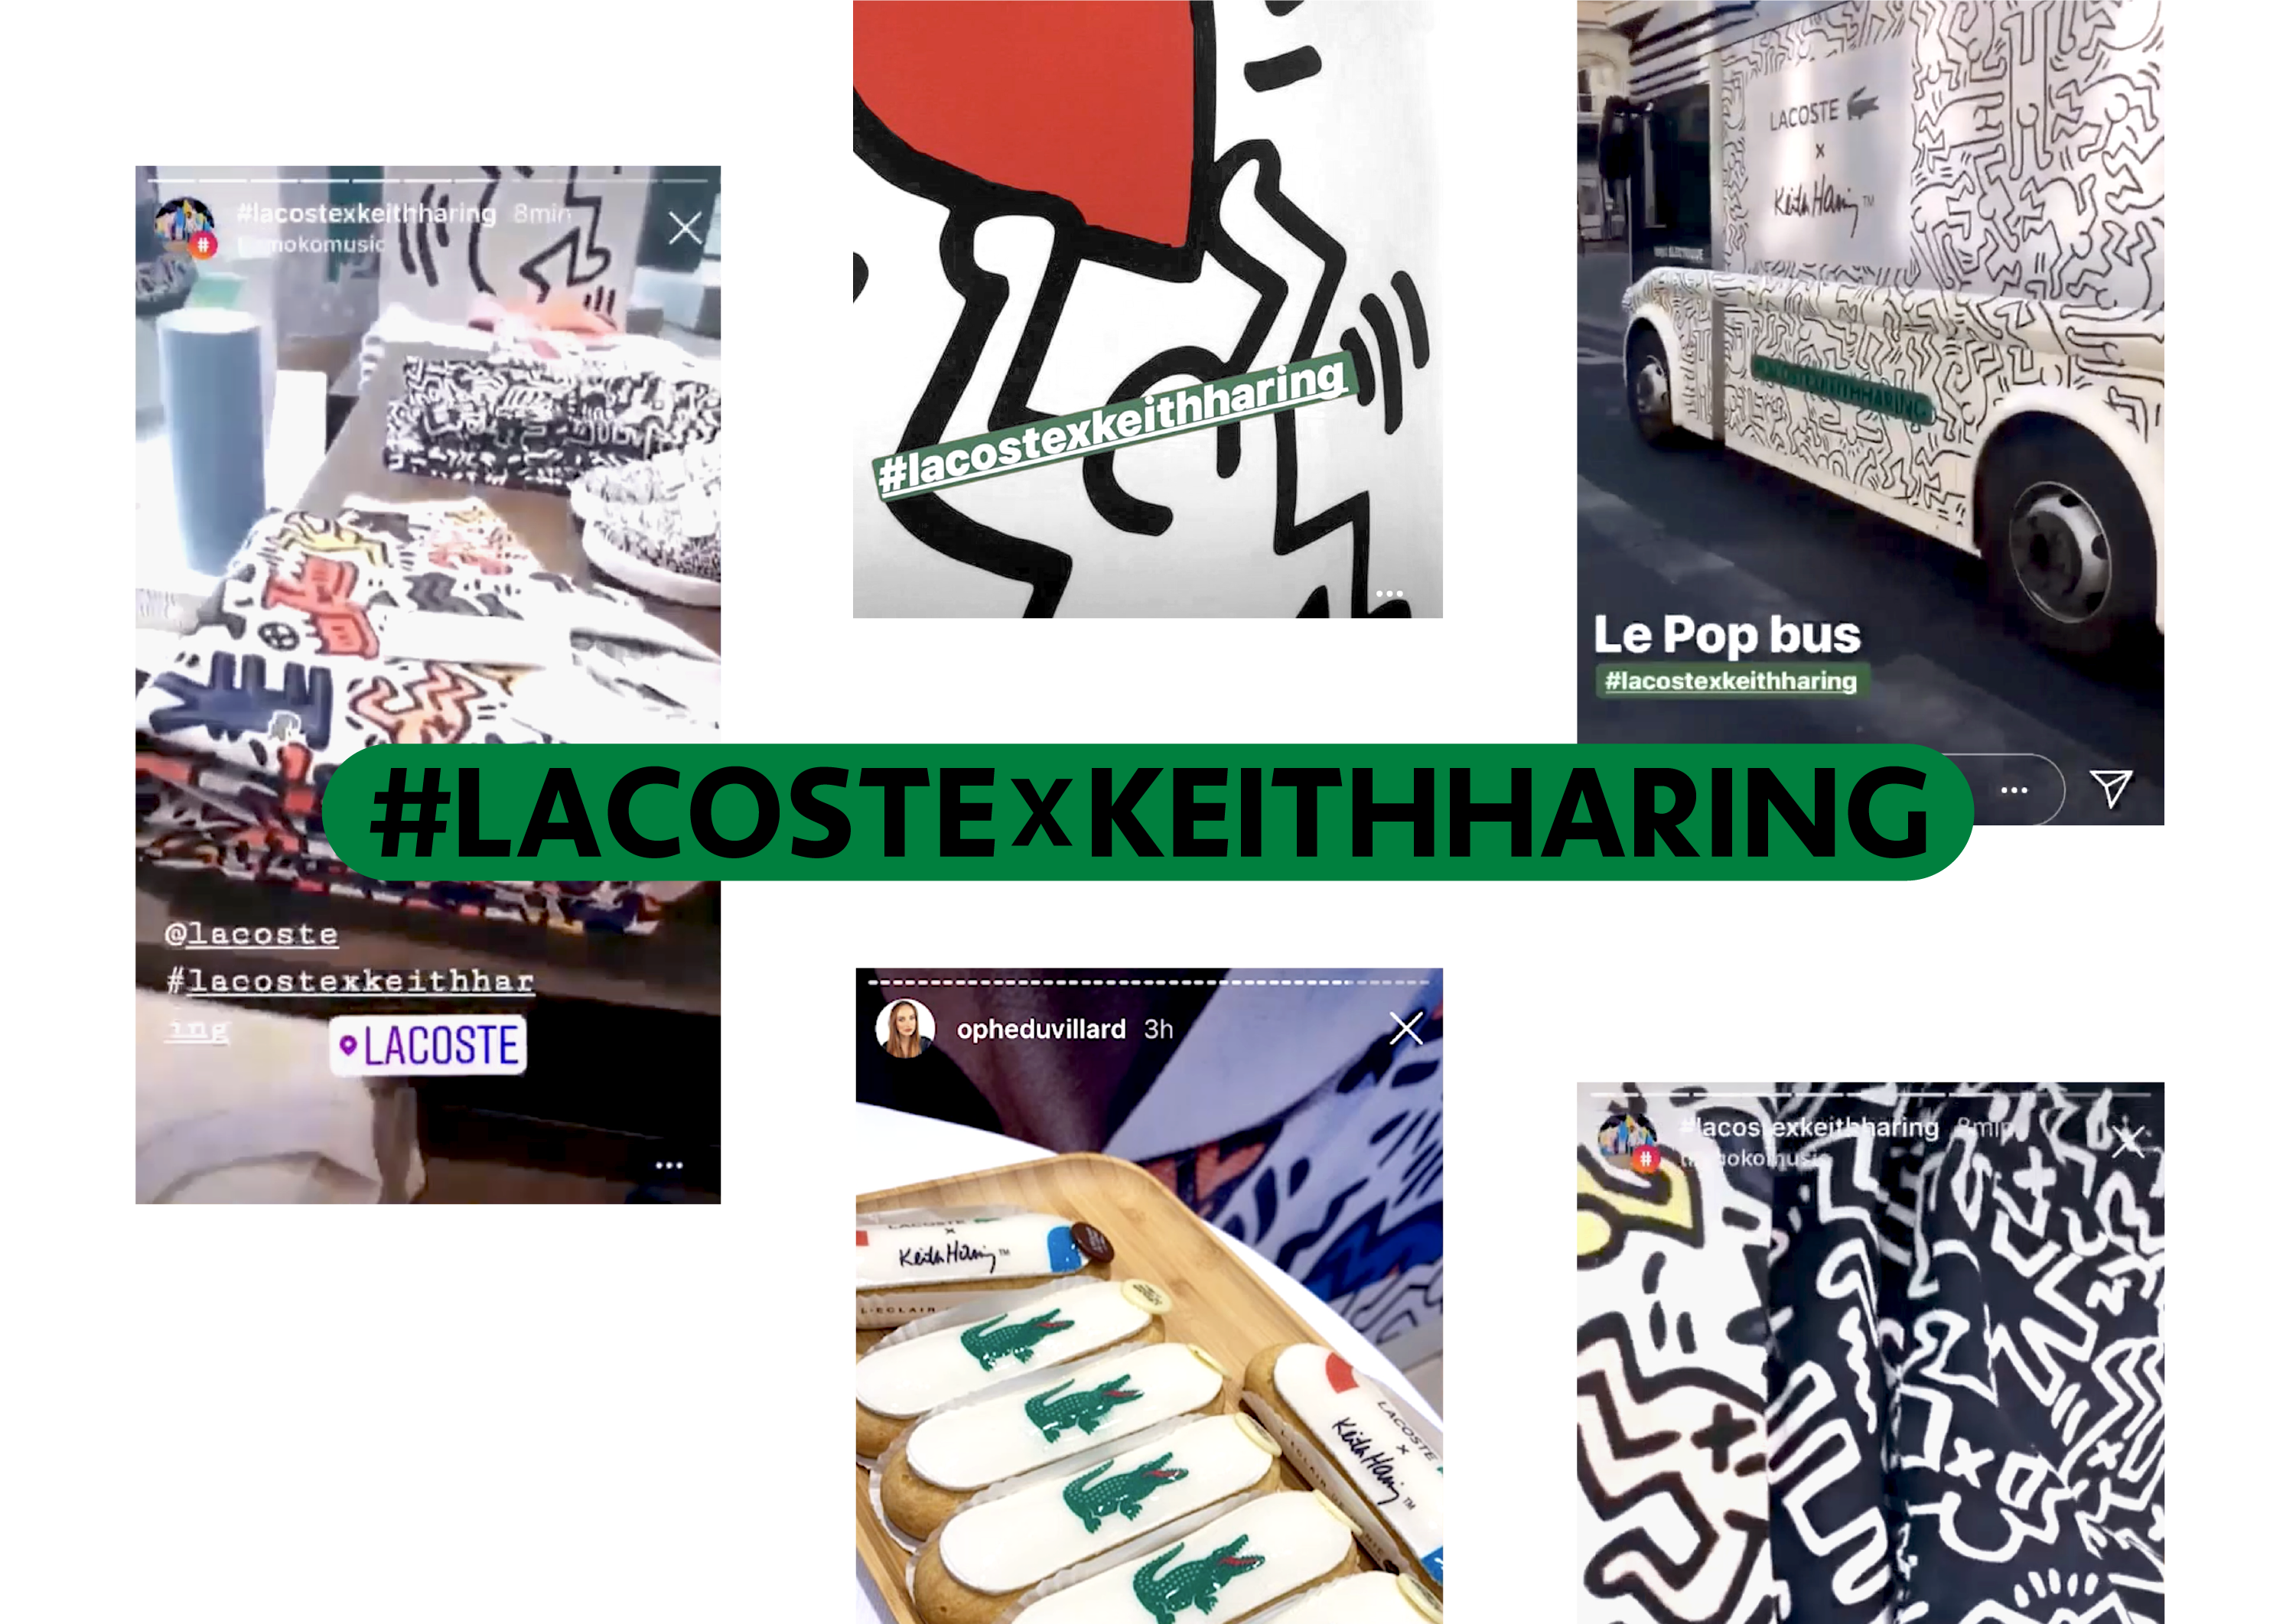 eclair nouvelle collection Lacoste activation Keith Haring